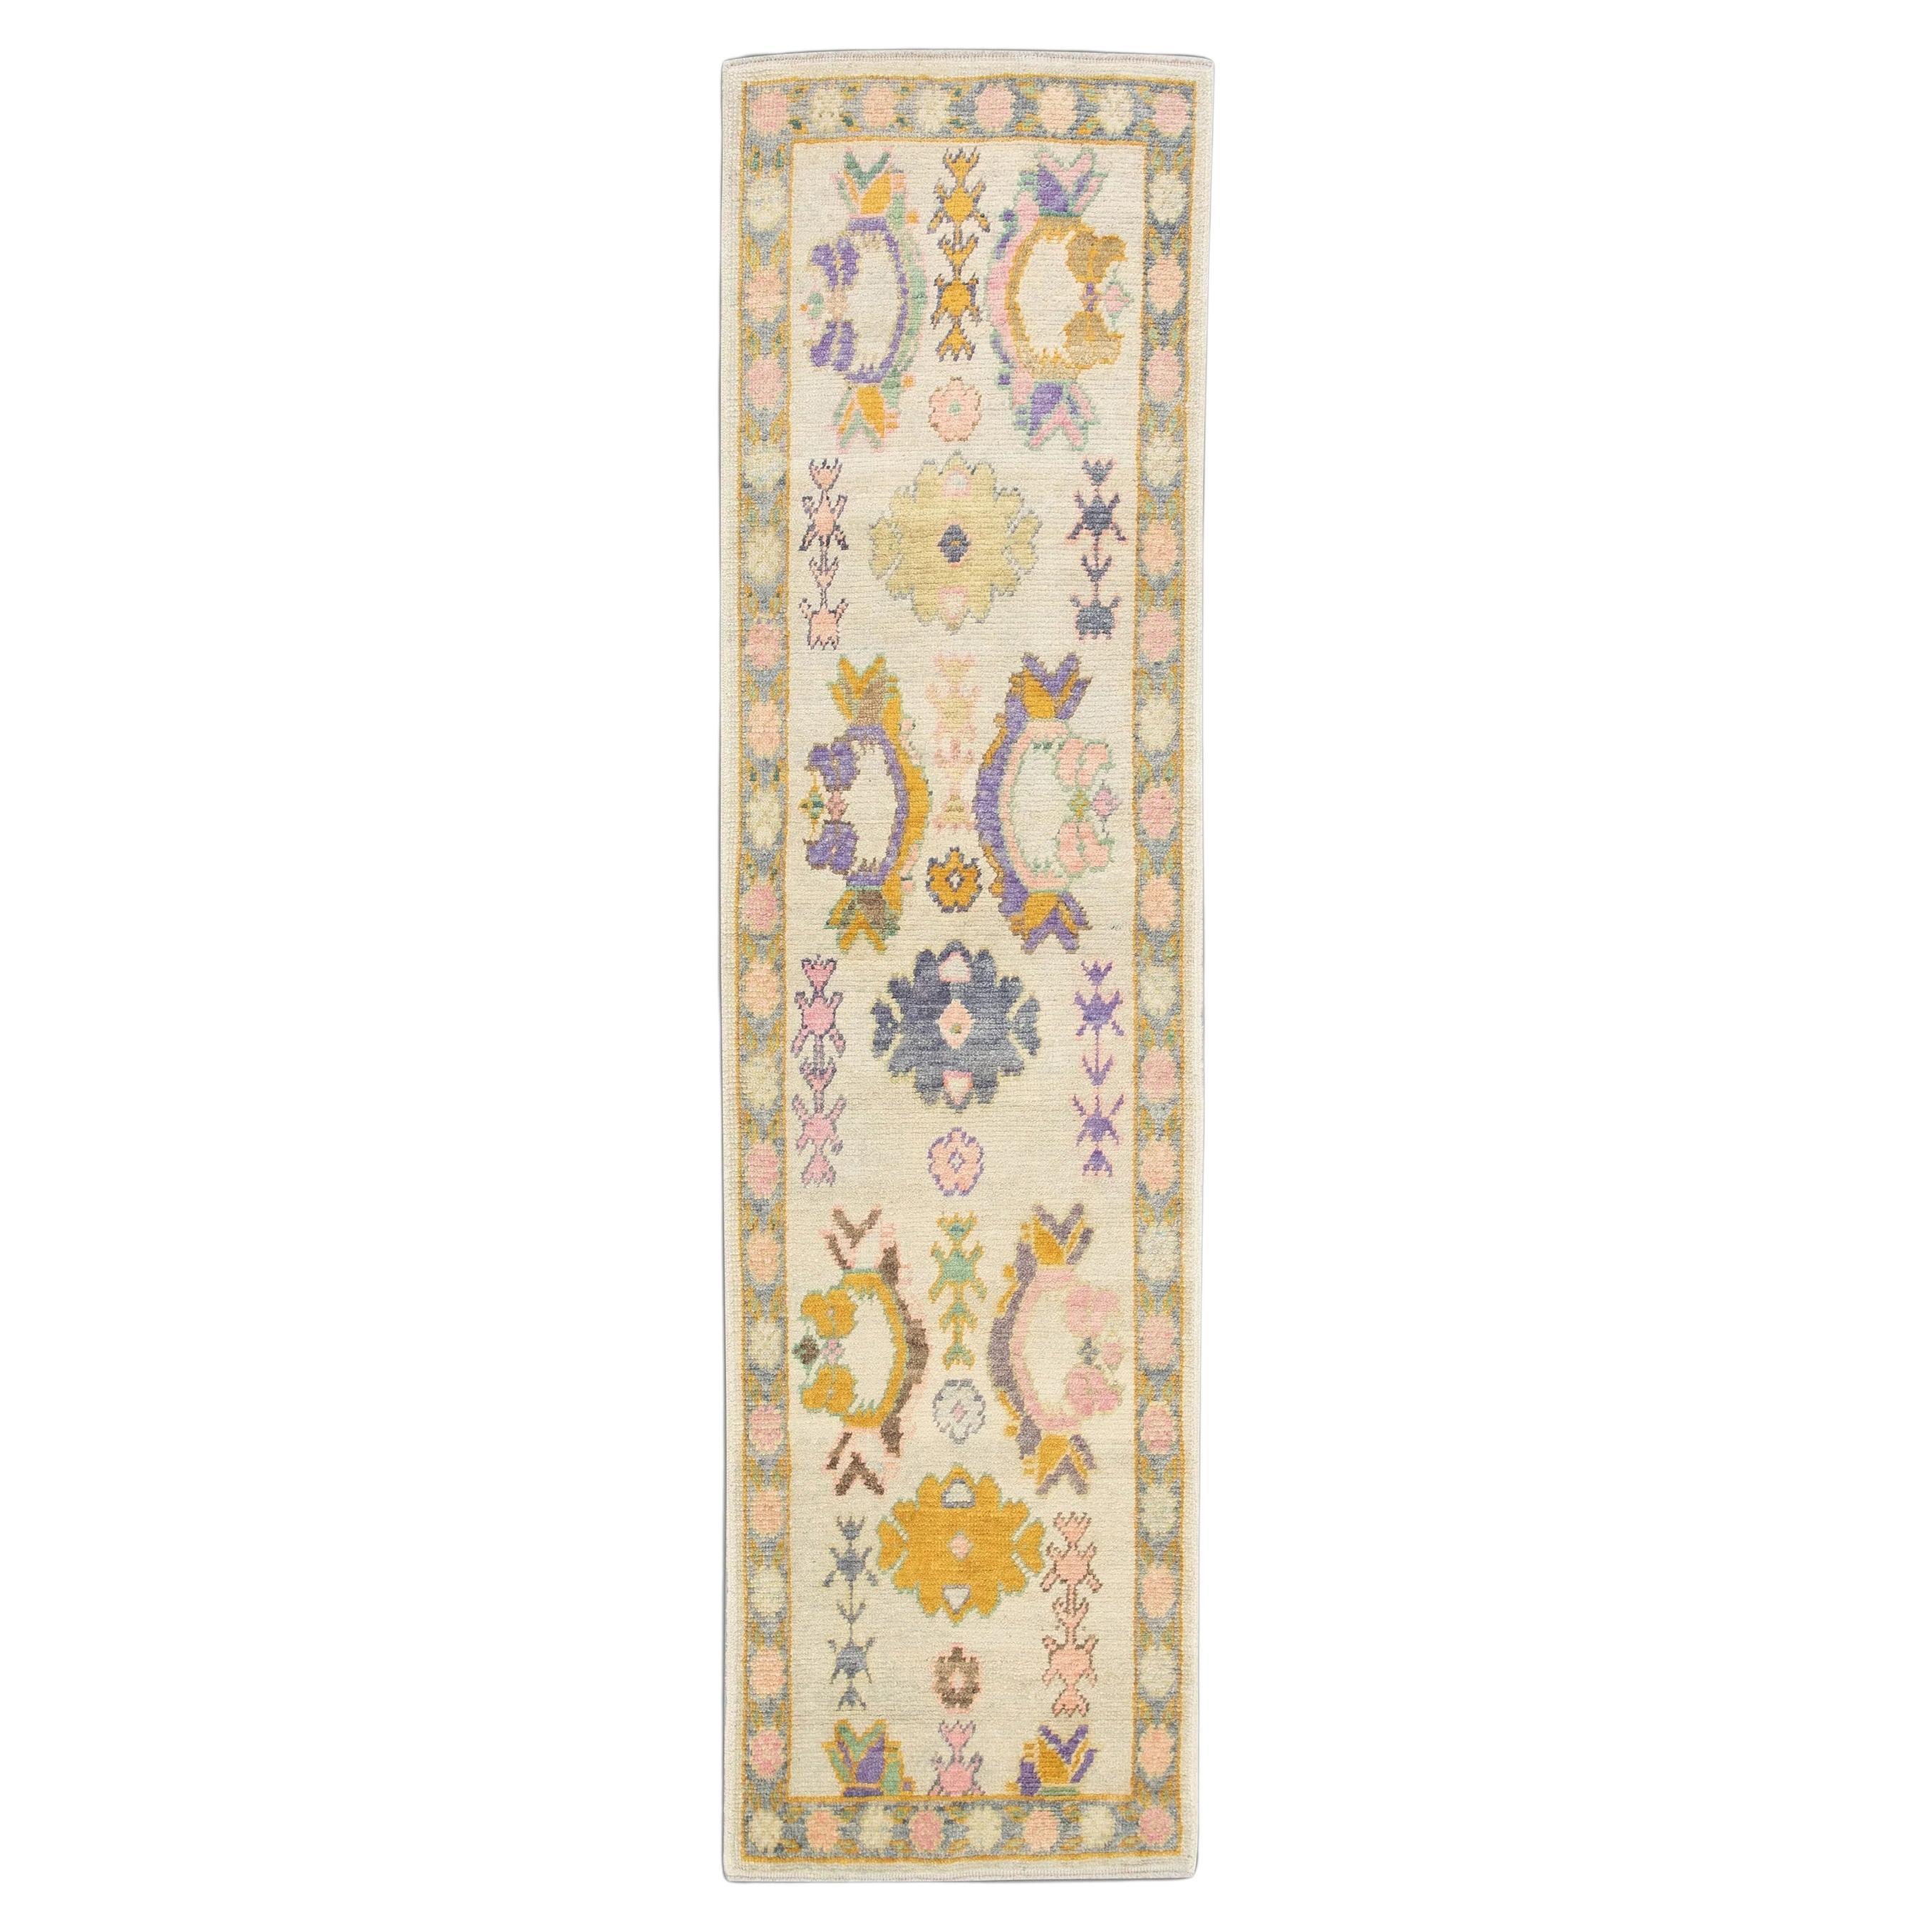 Colorful Floral Pattern Turkish Oushak Rug made with Handwoven Wool 2'9" x 10'3" For Sale